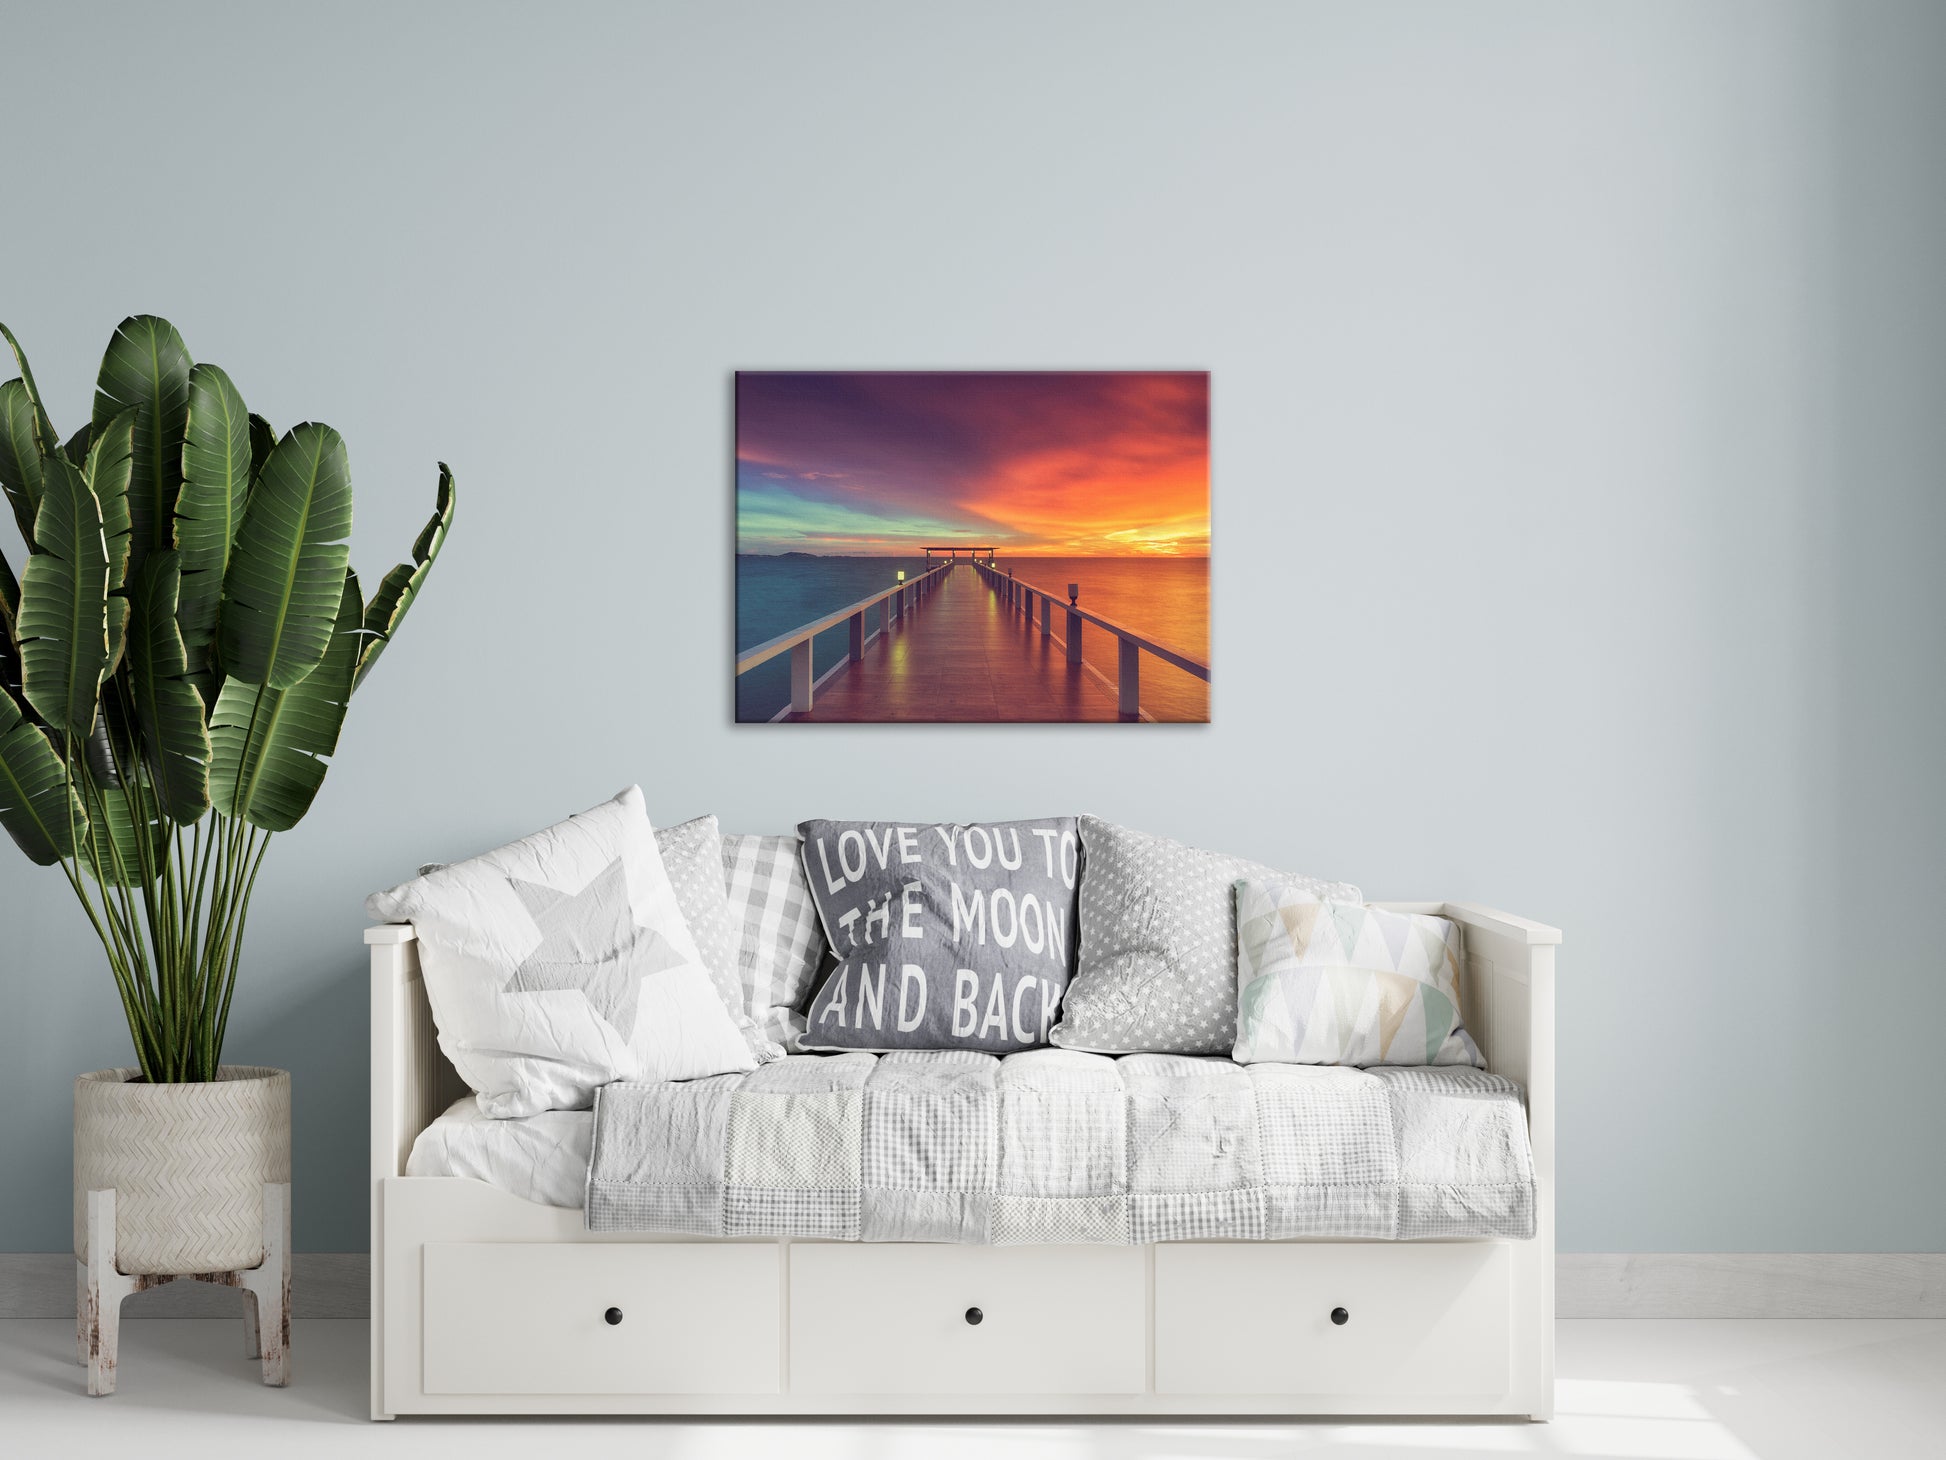 Wall Decor For Spare Bedroom: Surreal Wooden Pier At Sunset with Intrigued Effect Landscape Photo Canvas Wall Art Prints